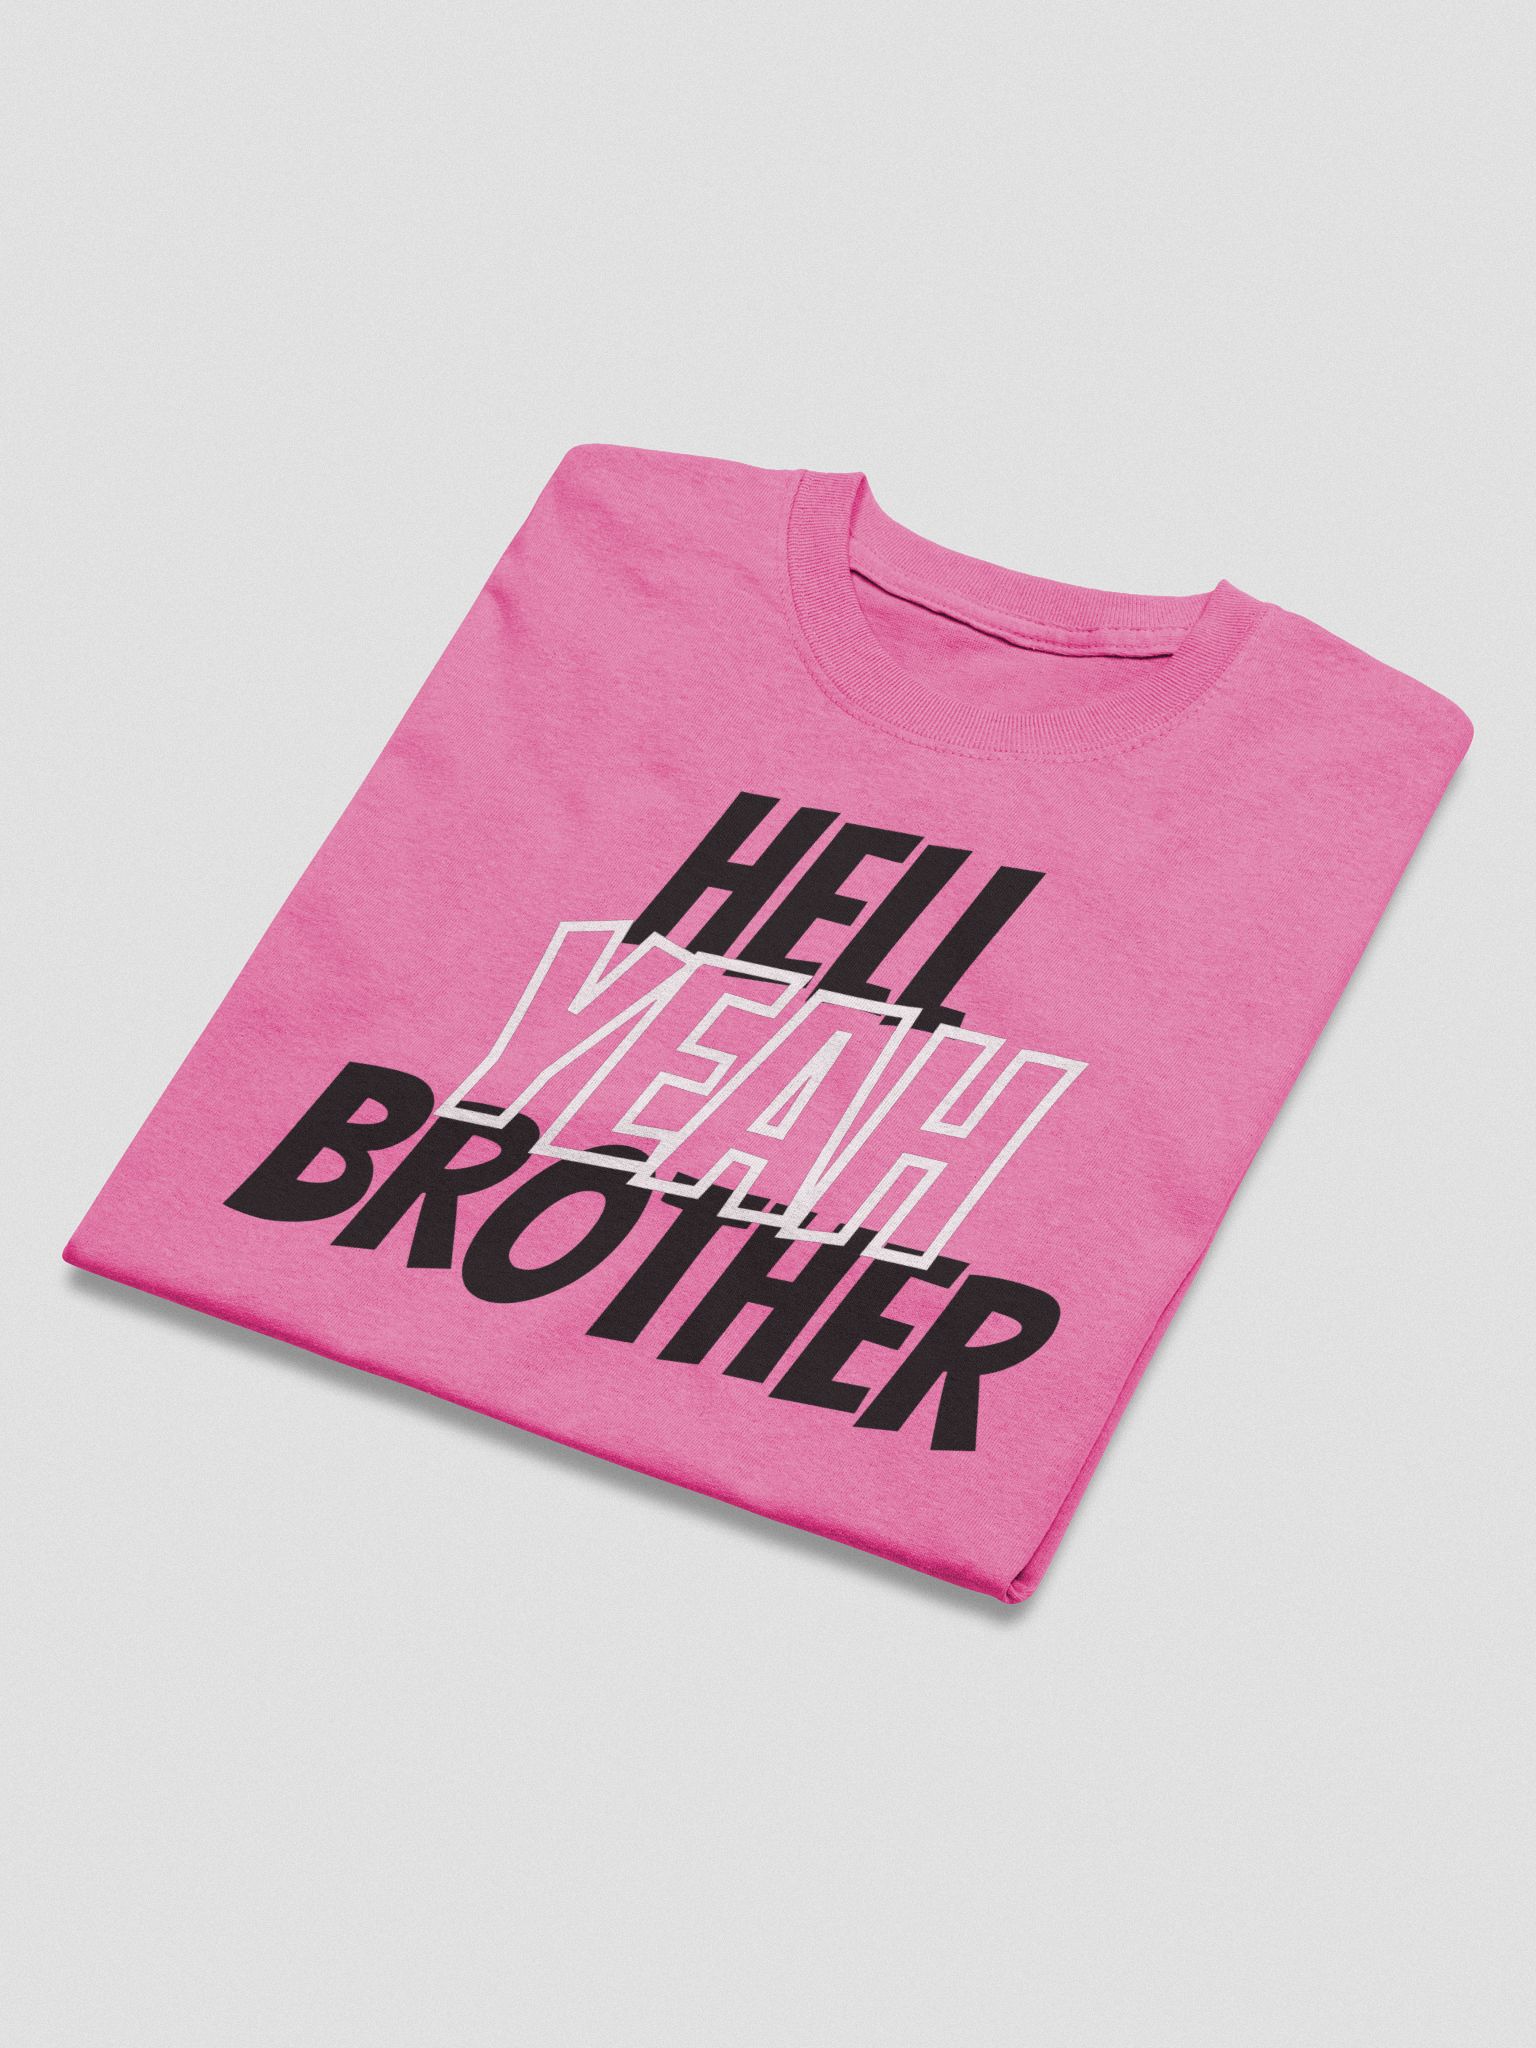 Hell Yeah Brother\